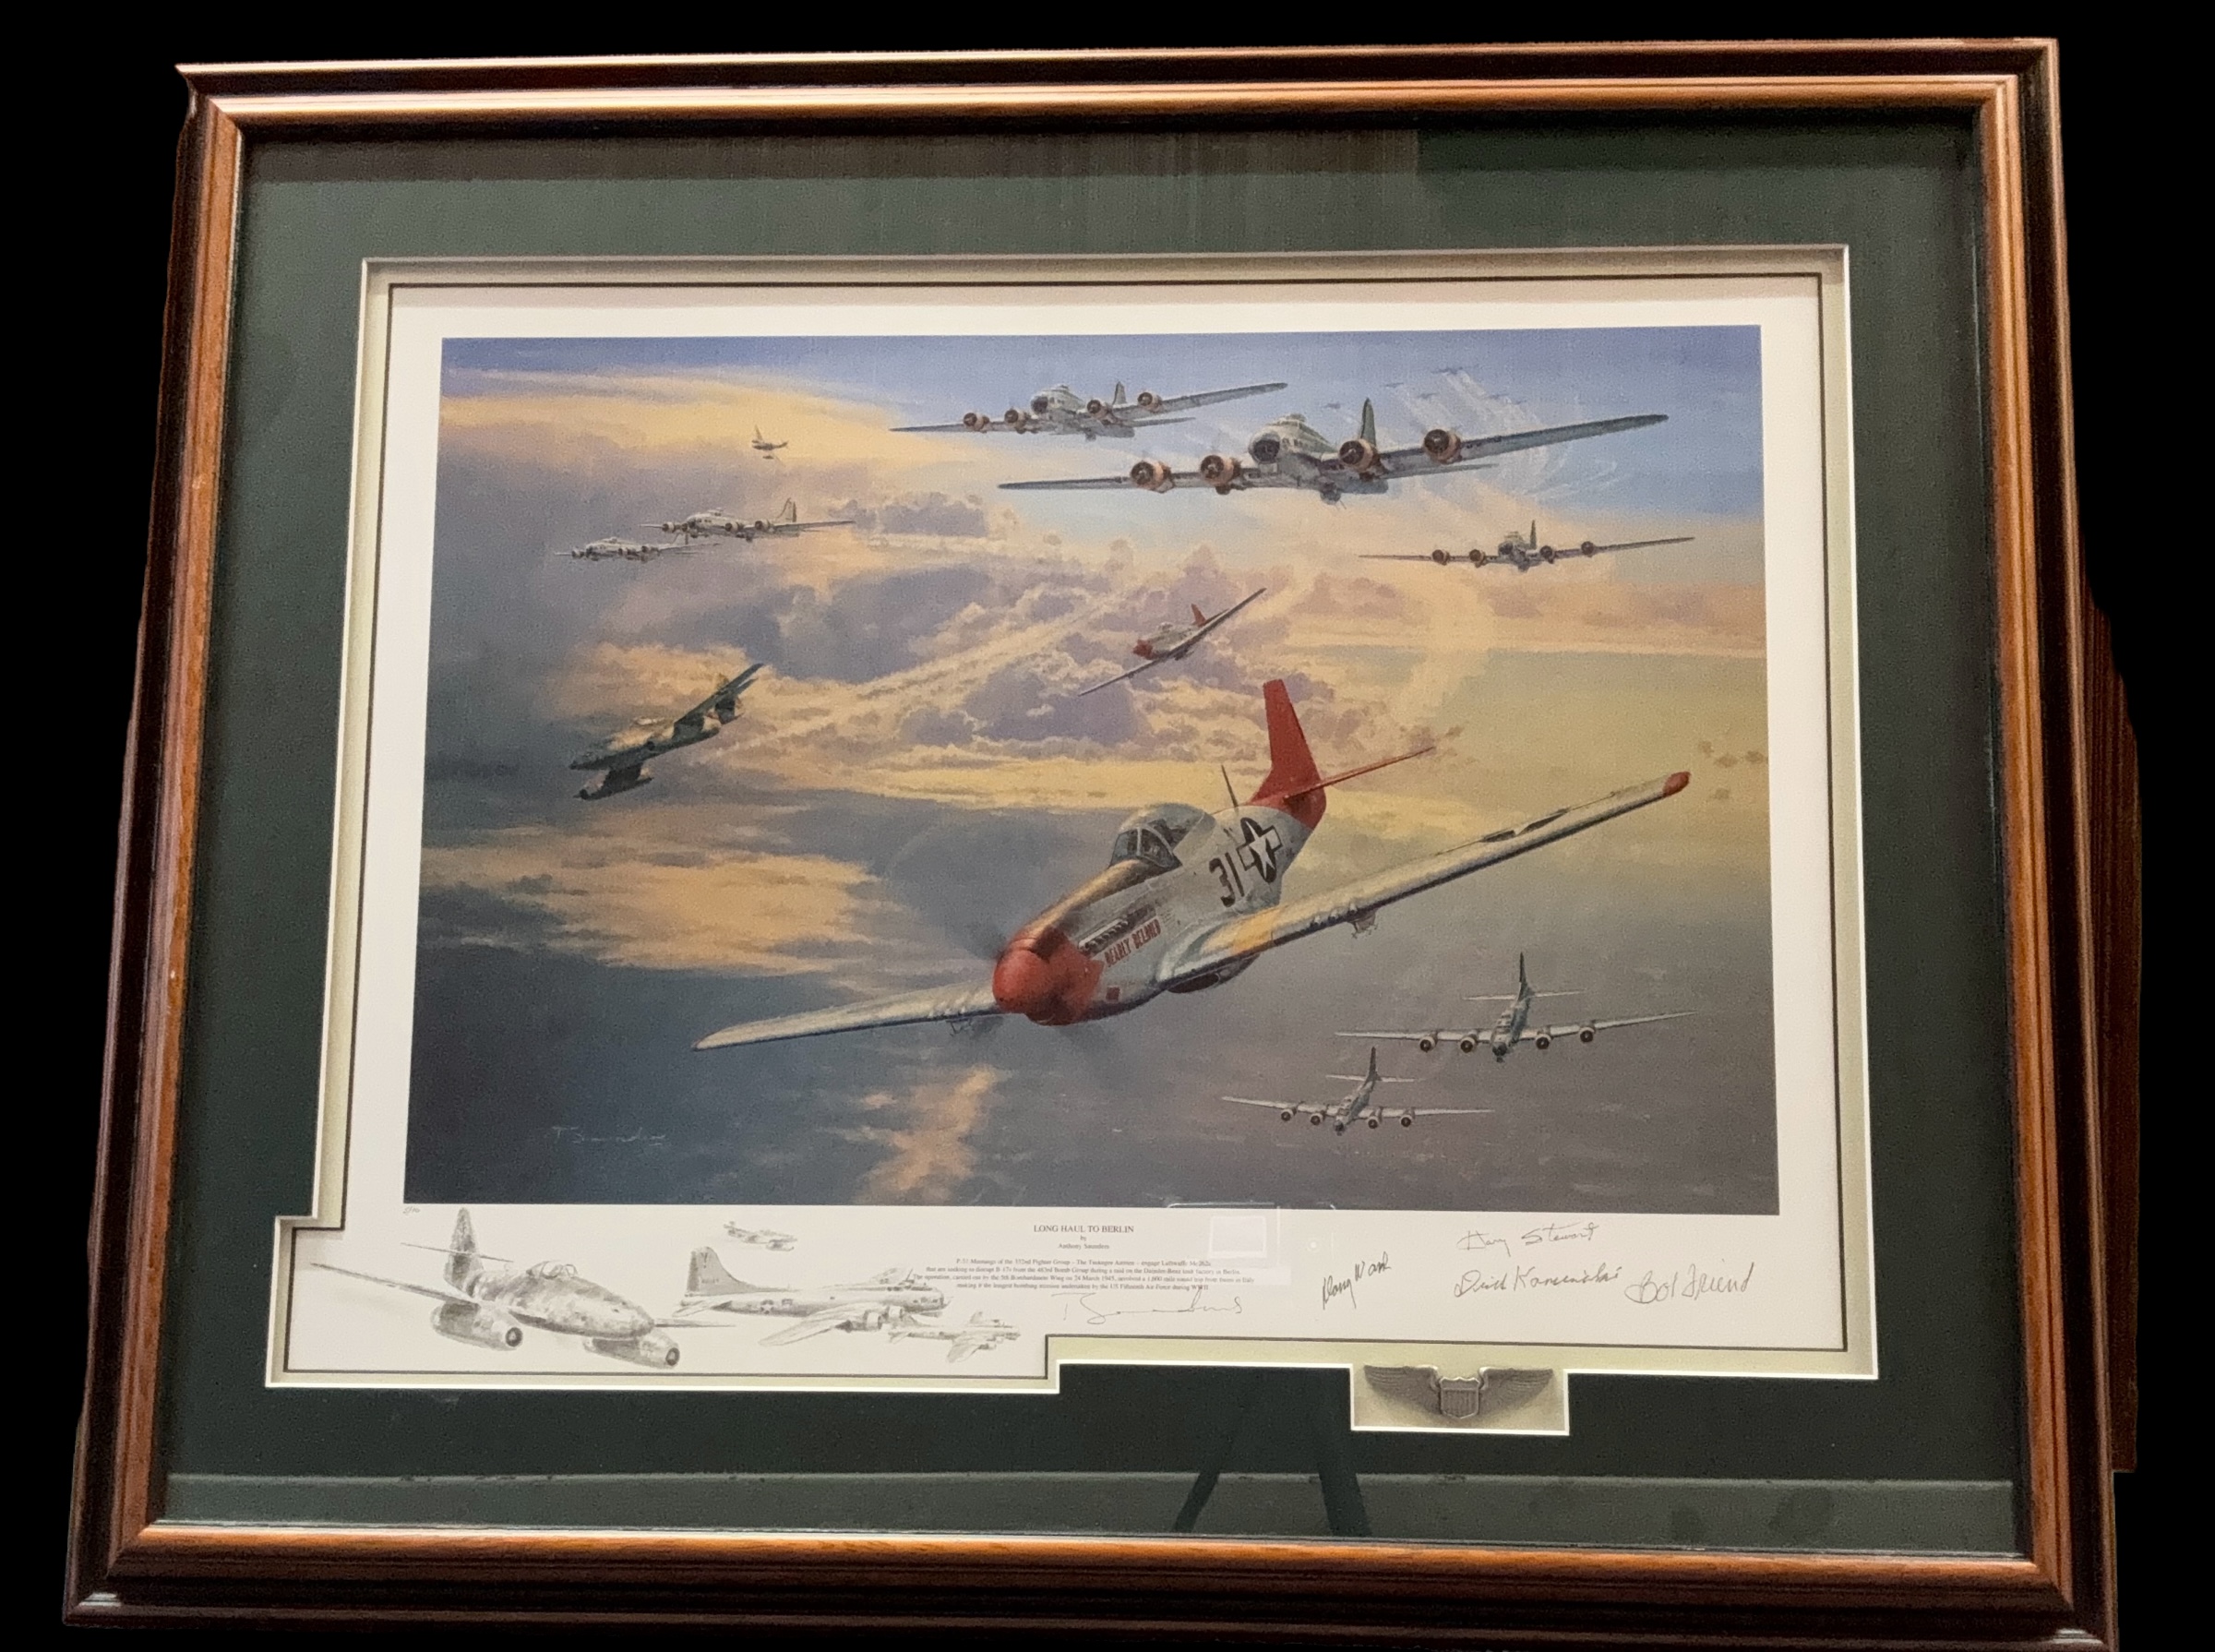 Long Haul to Berlin by Anthony Saunders signed colour print. The edition is signed by artist Anthony